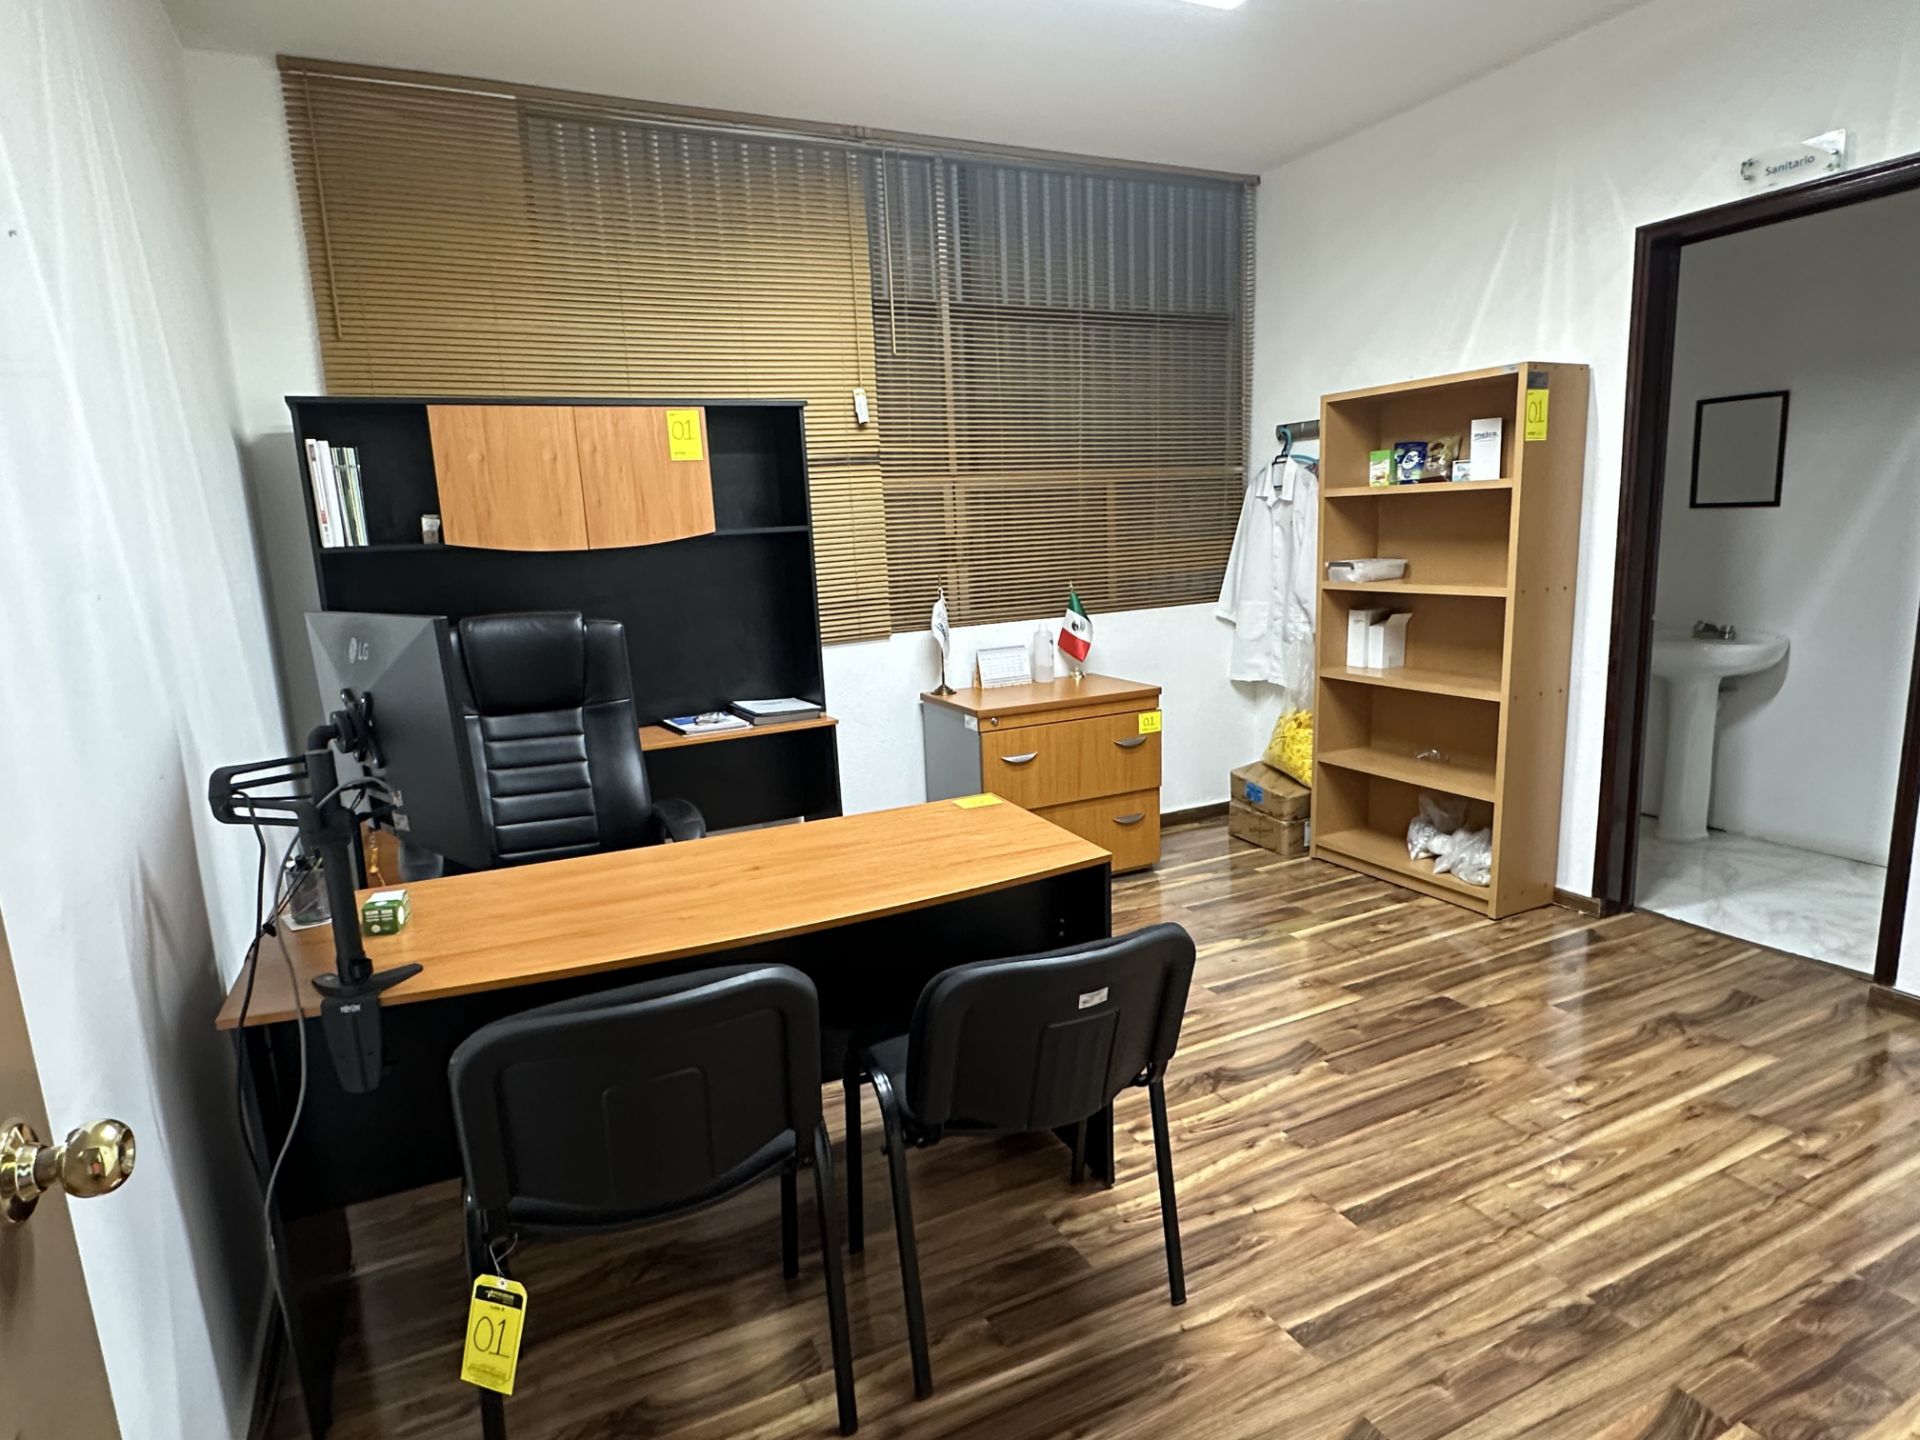 Lot of office furniture includes: 1 Desk in brown wood measures approximately 1.50 x 0.60 x 0.75 m;